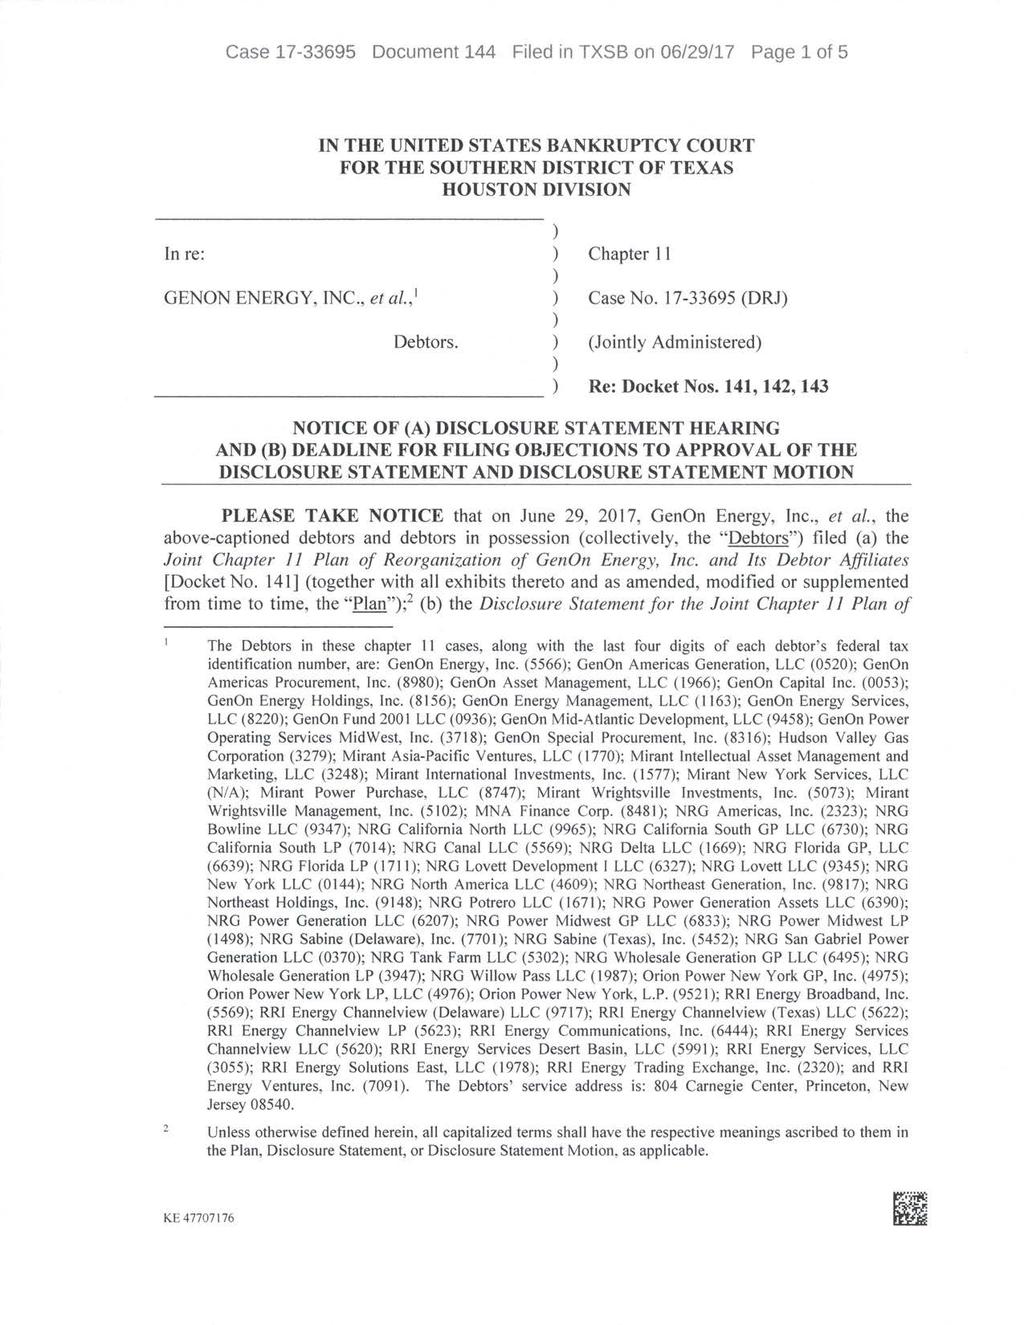 Case 17-33695 Document 144 Filed in TXSB on 06/29/17 Page 1 of 5 IN THE UNITED STATES BANKRUPTCY COURT FOR THE SOUTHERN DISTRICT OF TEXAS HOUSTON DIVISION In re: Chapter II GENON ENERGY, INC.. et a/.